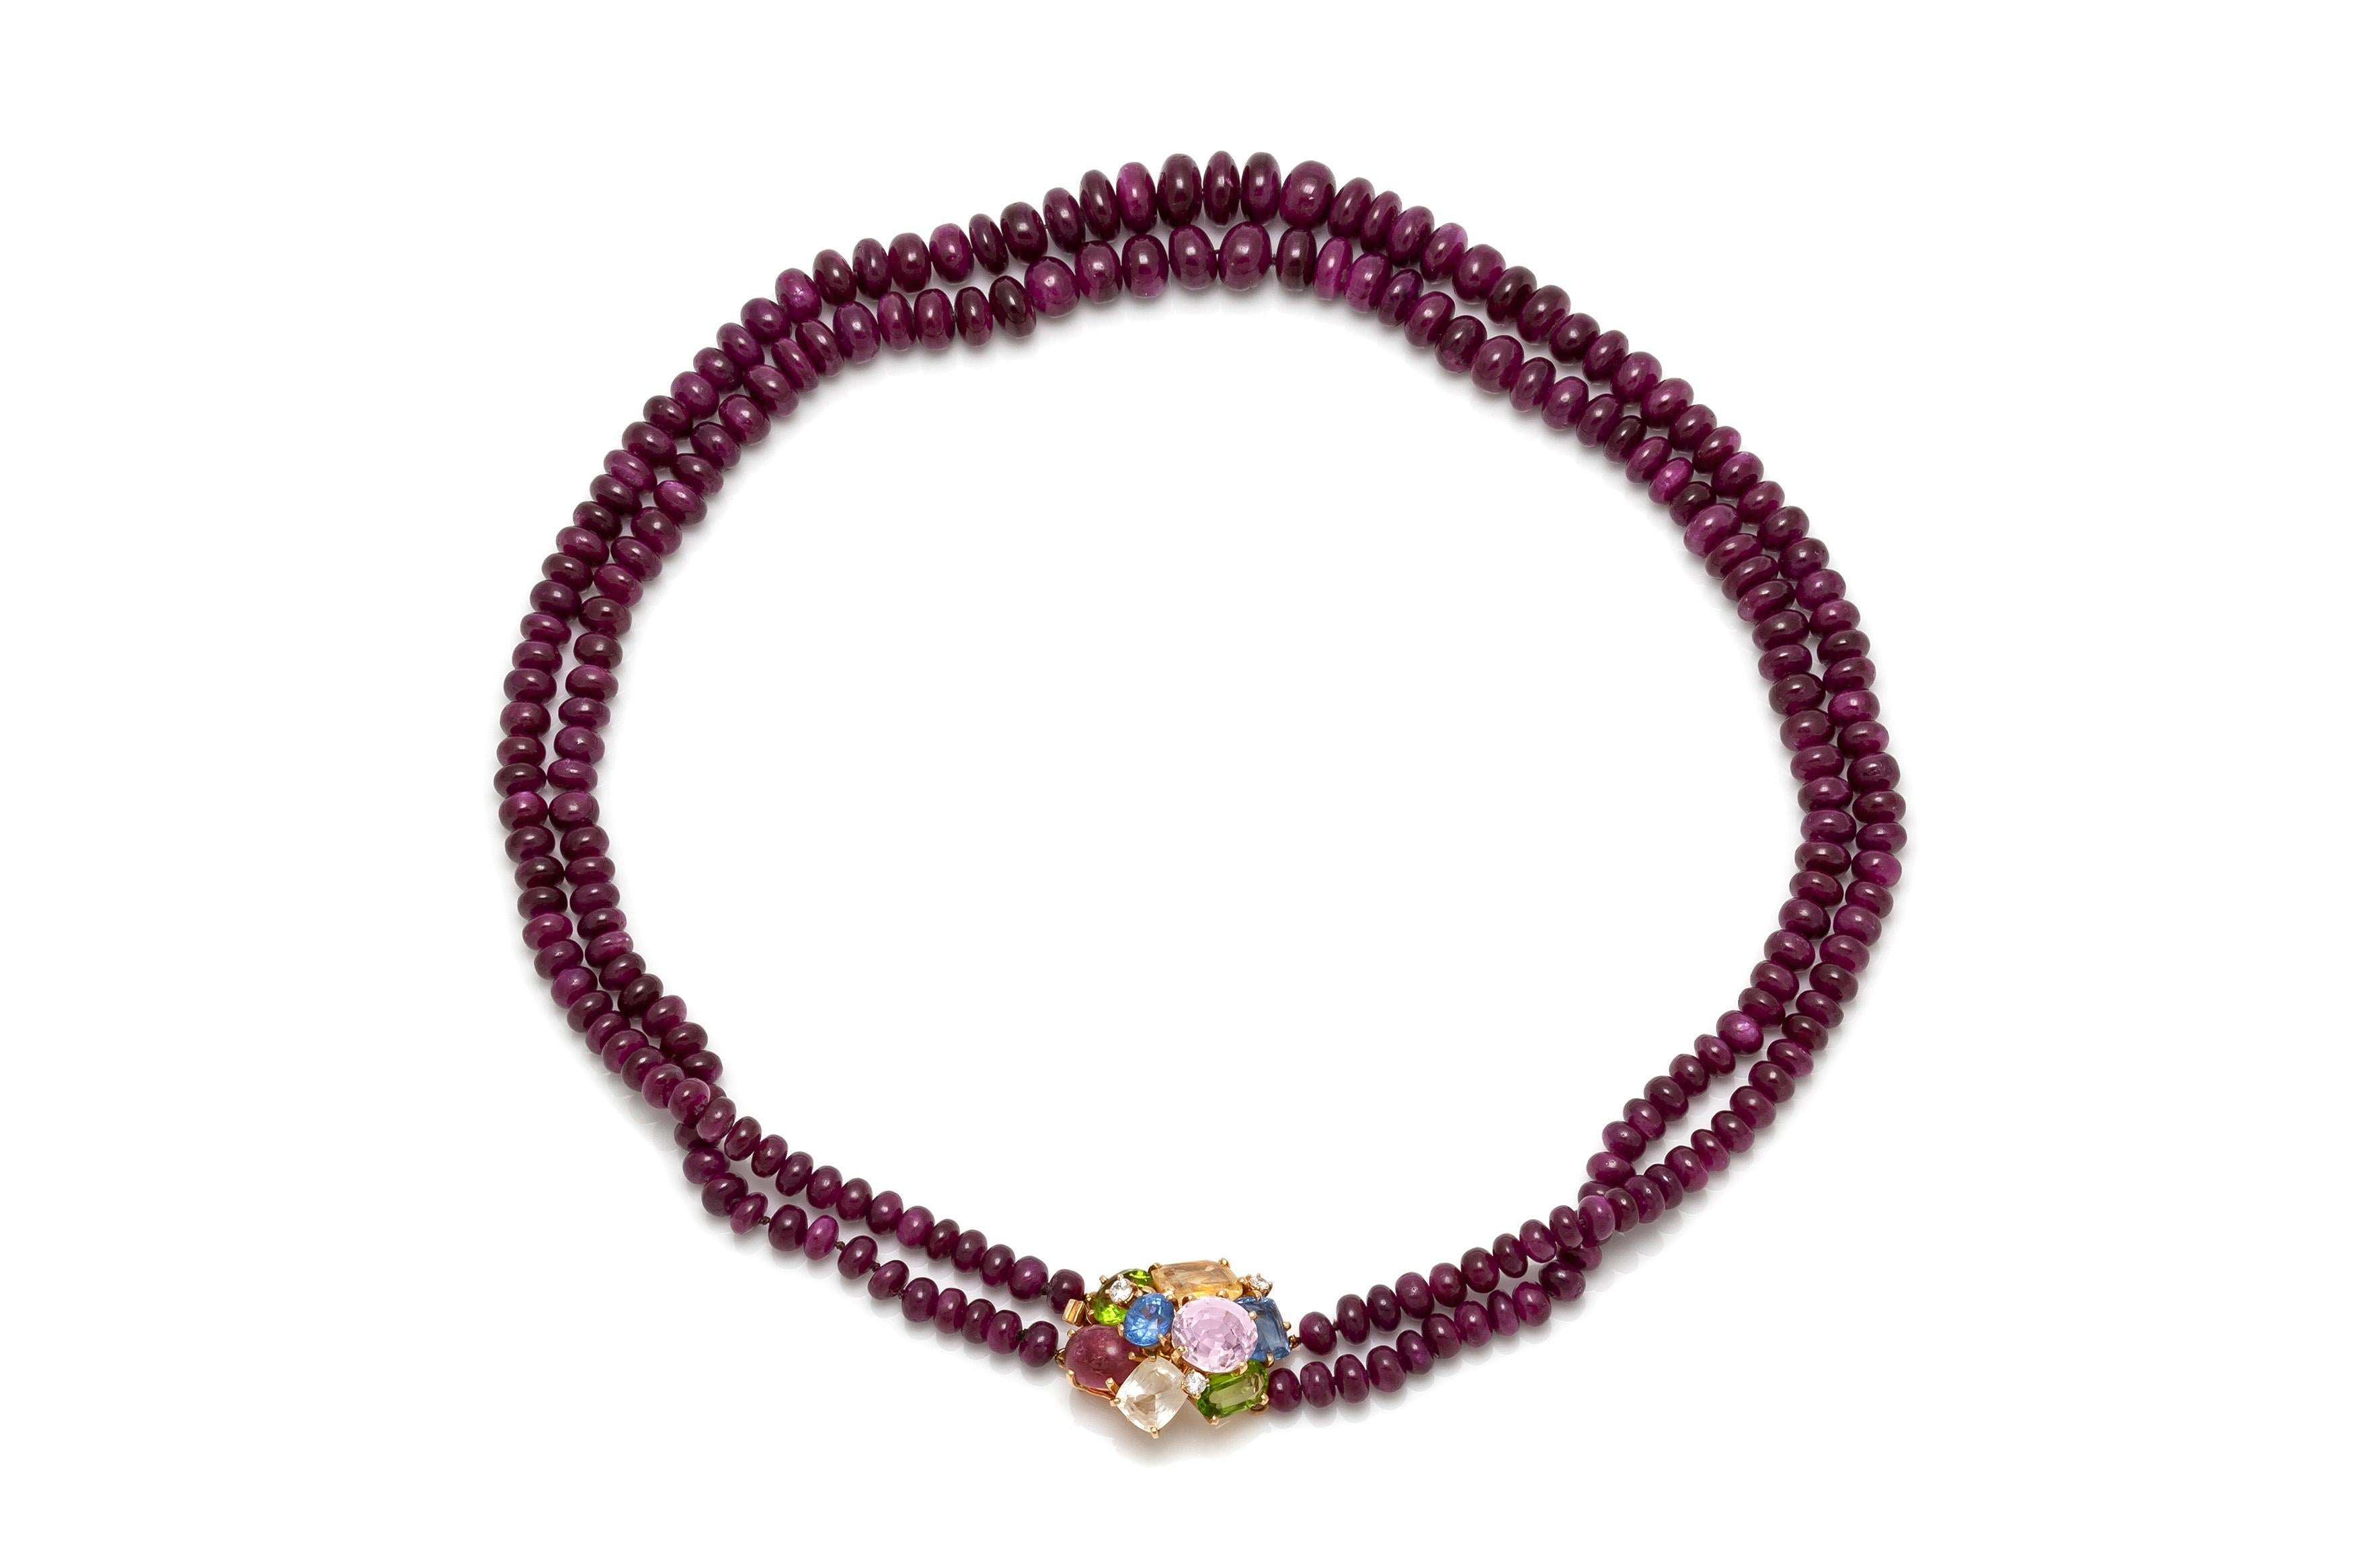 Seaman Schepps ruby beads necklace, finely crafted in 14k yellow gold with a beautiful clasp with multi-color rubies. Circa 1950's.